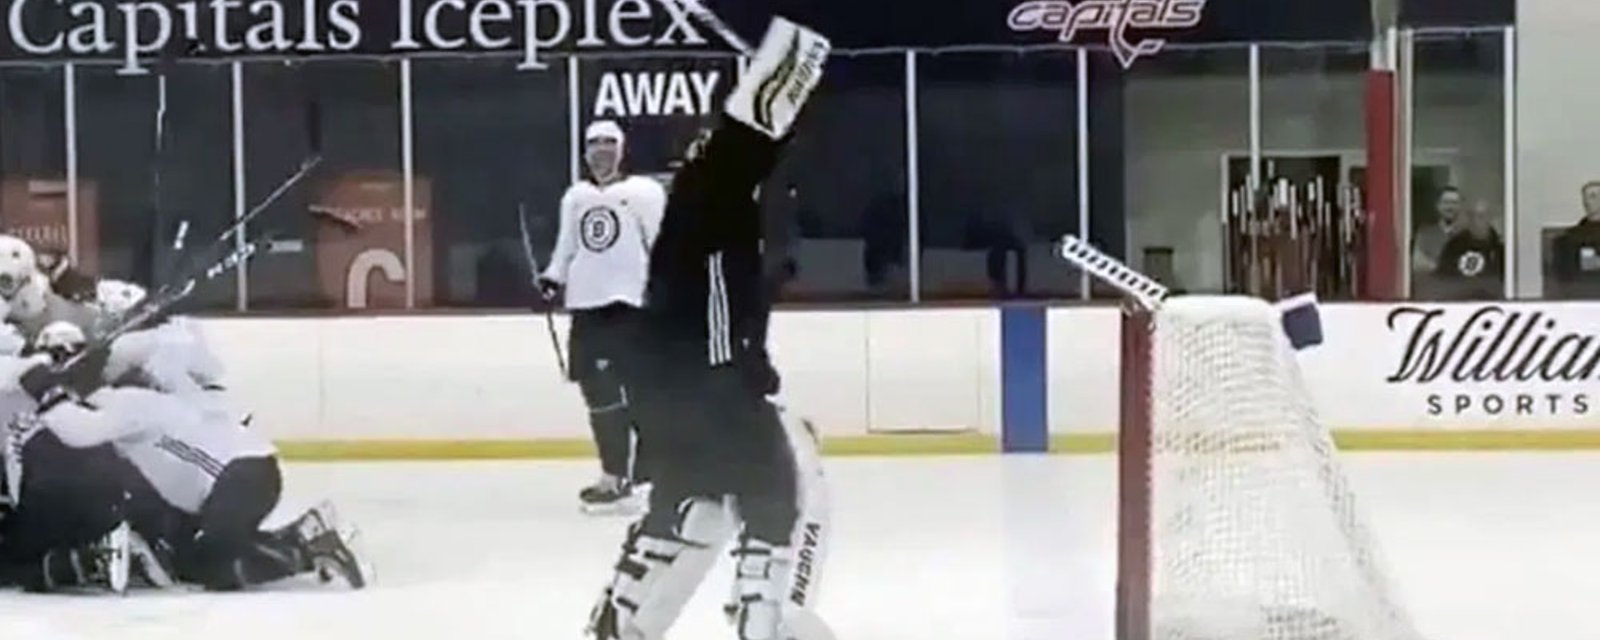 Rask breaks stick, goes ballistic after losing scrimmage game at Bruins practice